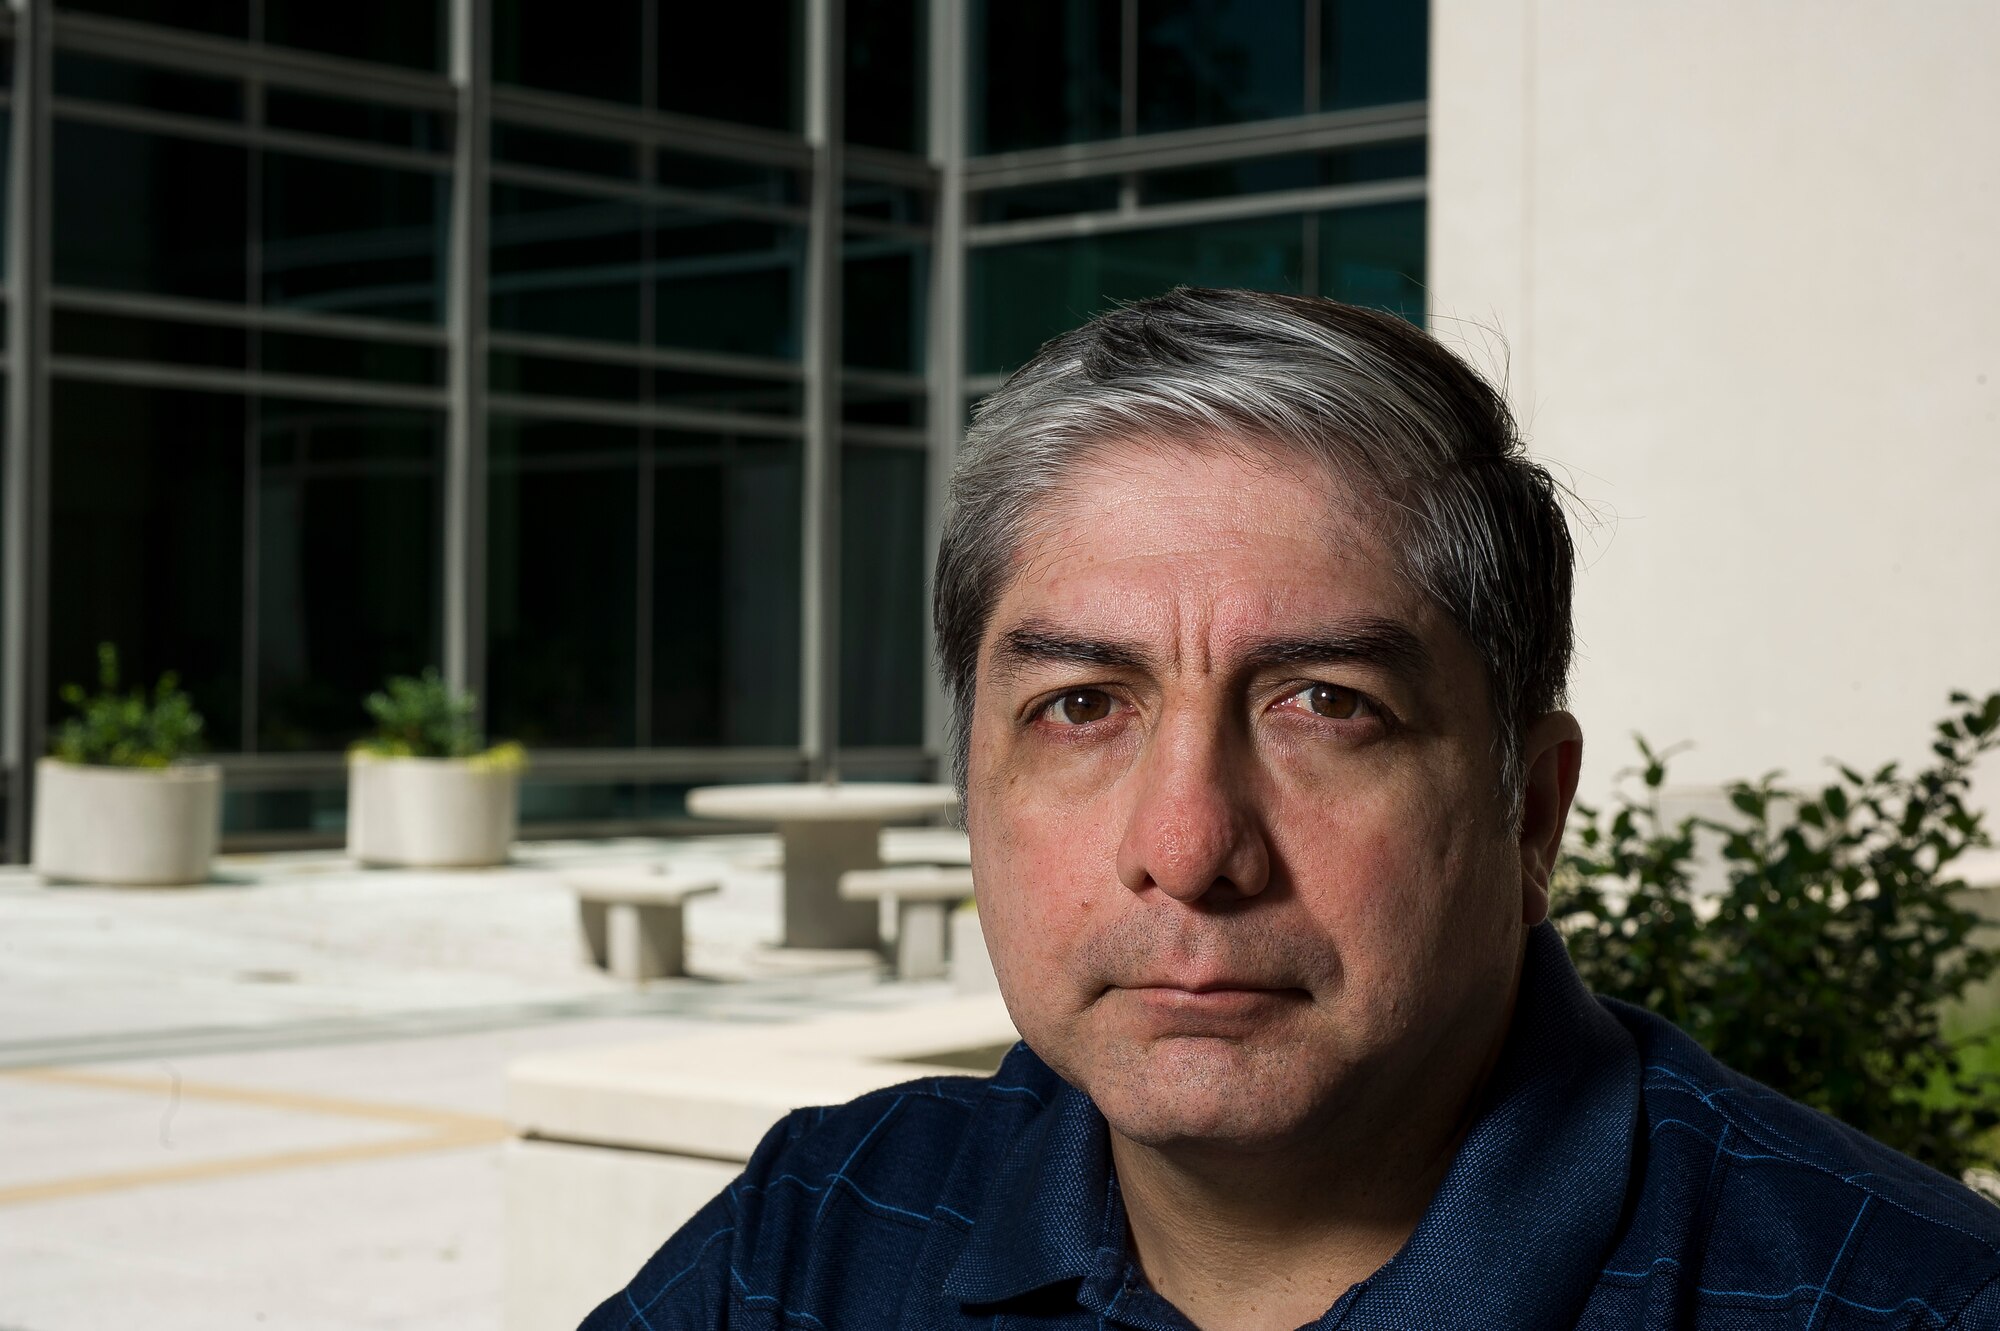 Alfredo Guerrero sits in front of the Defense Threat Reduction Agency building at Fort Belvoir, Va., on June 10, 2016, where he works as the anti-terrorism program manager. Guerrero was on top of Bldg. 131 of the Khobar Towers complex in Dharan, Saudi Arabia, on June 25, 1996, when he spotted a suspicious large gas truck drive toward the building. When the truck parked and two men jumped out and got into a car that had been following them, Guerrero and two other Airmen immediately began evacuating the building. A short time later the truck exploded, killing 19 Airmen and injuring more than 350 people. (U.S. Air Force photo/Staff Sgt. Christopher Gross)